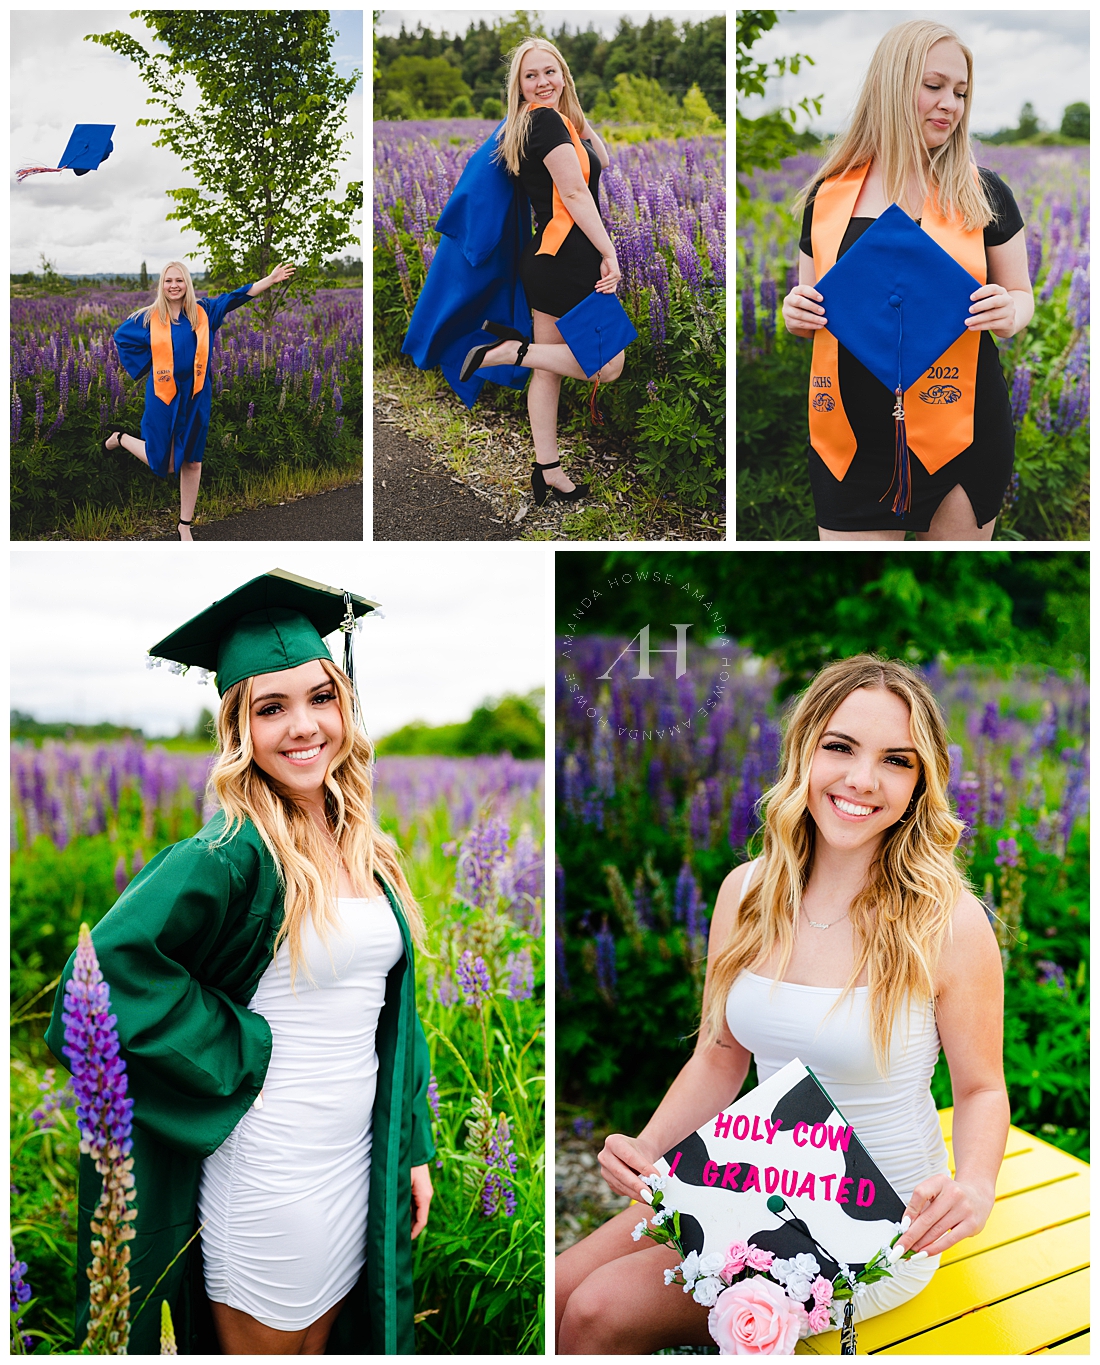 Personalized Cap and Gown Portraits in Outdoor Flower Fields | PNW Senior Portrait Session | Photographed by the Best Tacoma Senior Portrait Photographer Amanda Howse